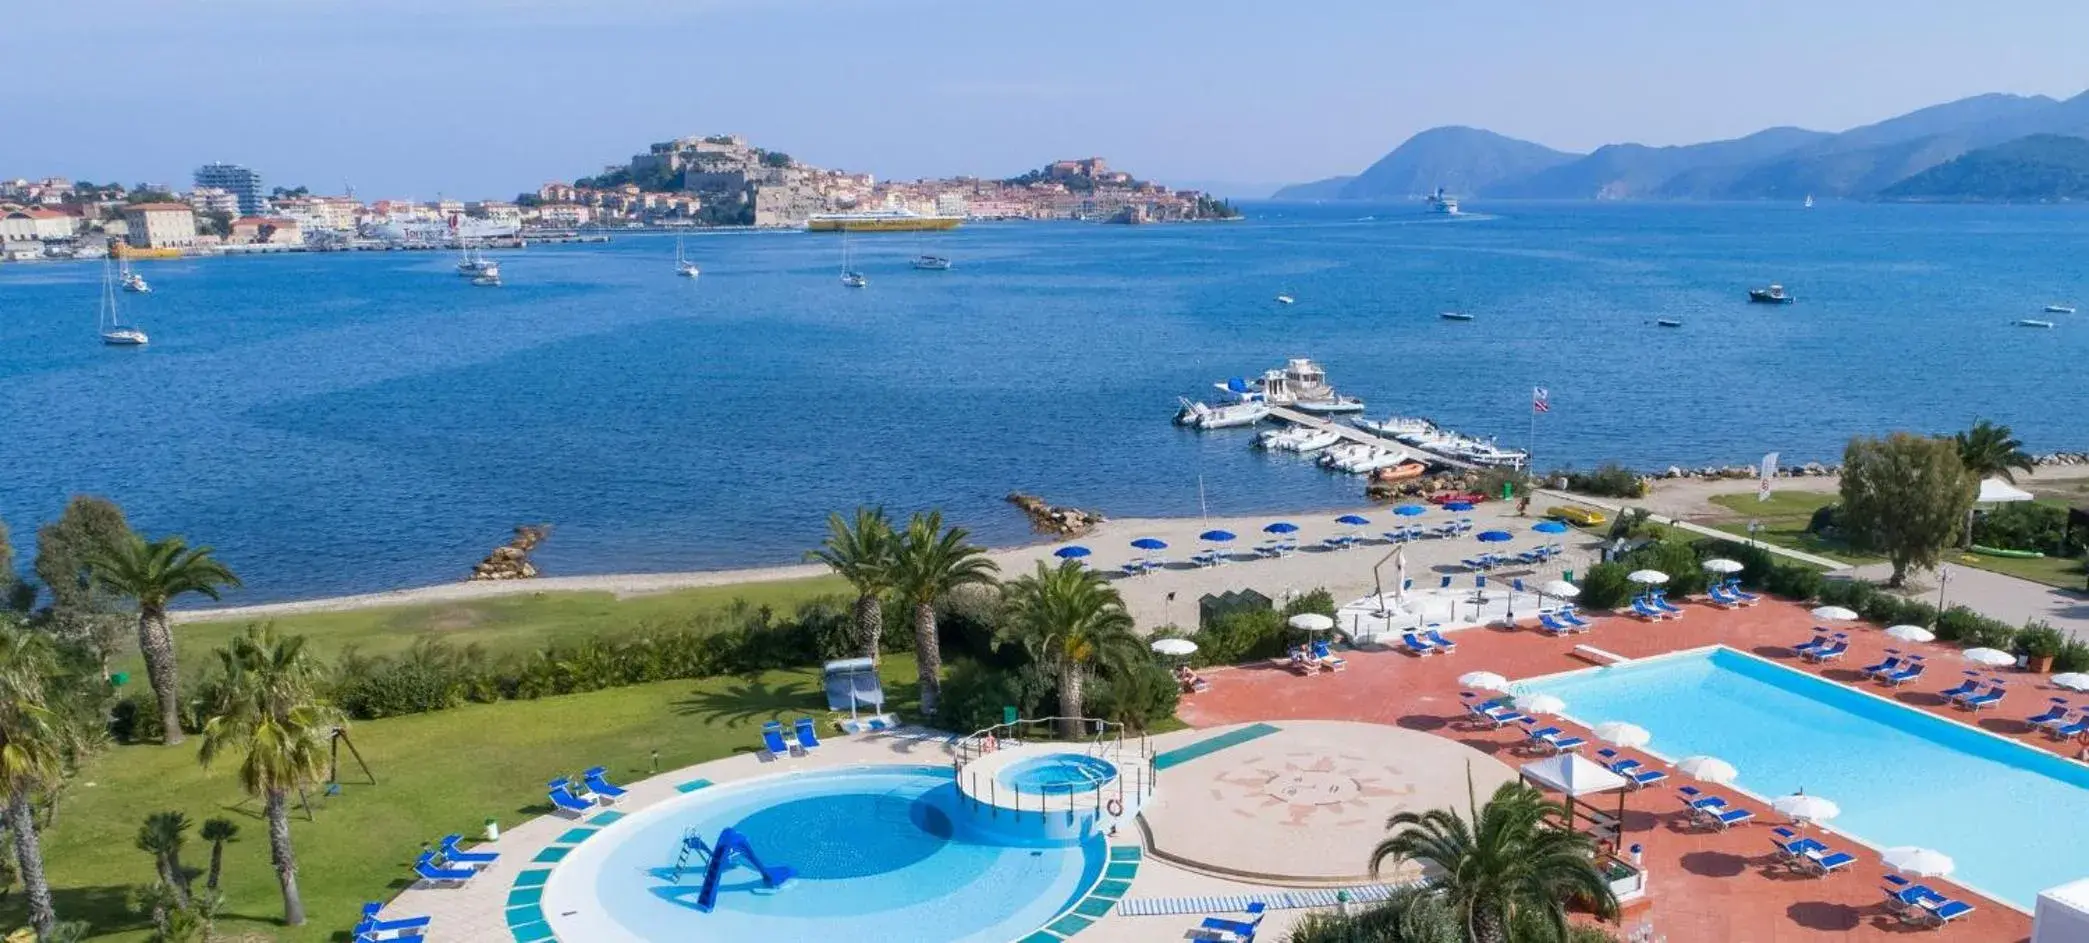 Property building, Pool View in Hotel Airone isola d'Elba